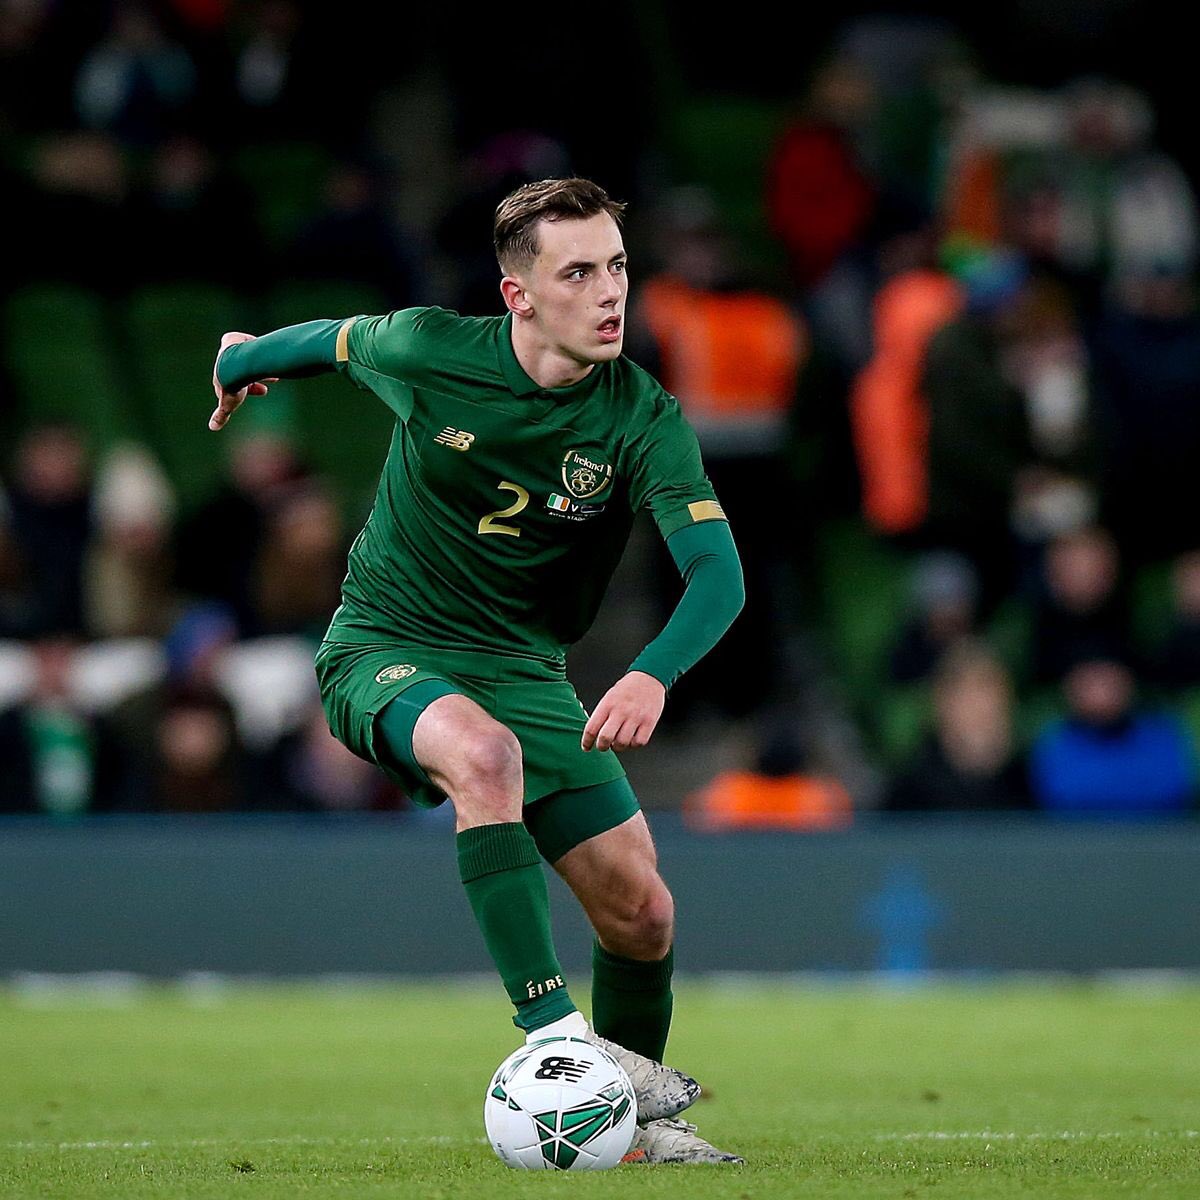 Lee O’Connor:  @TranmereRovers Originally from Waterford in the Republic of Ireland, the 20-year-old is spending the season on loan at  #TRFC from Celtic.He can play anywhere along the backline, and should be a welcome addition to the  #SWA’s defensive unit. #EFL